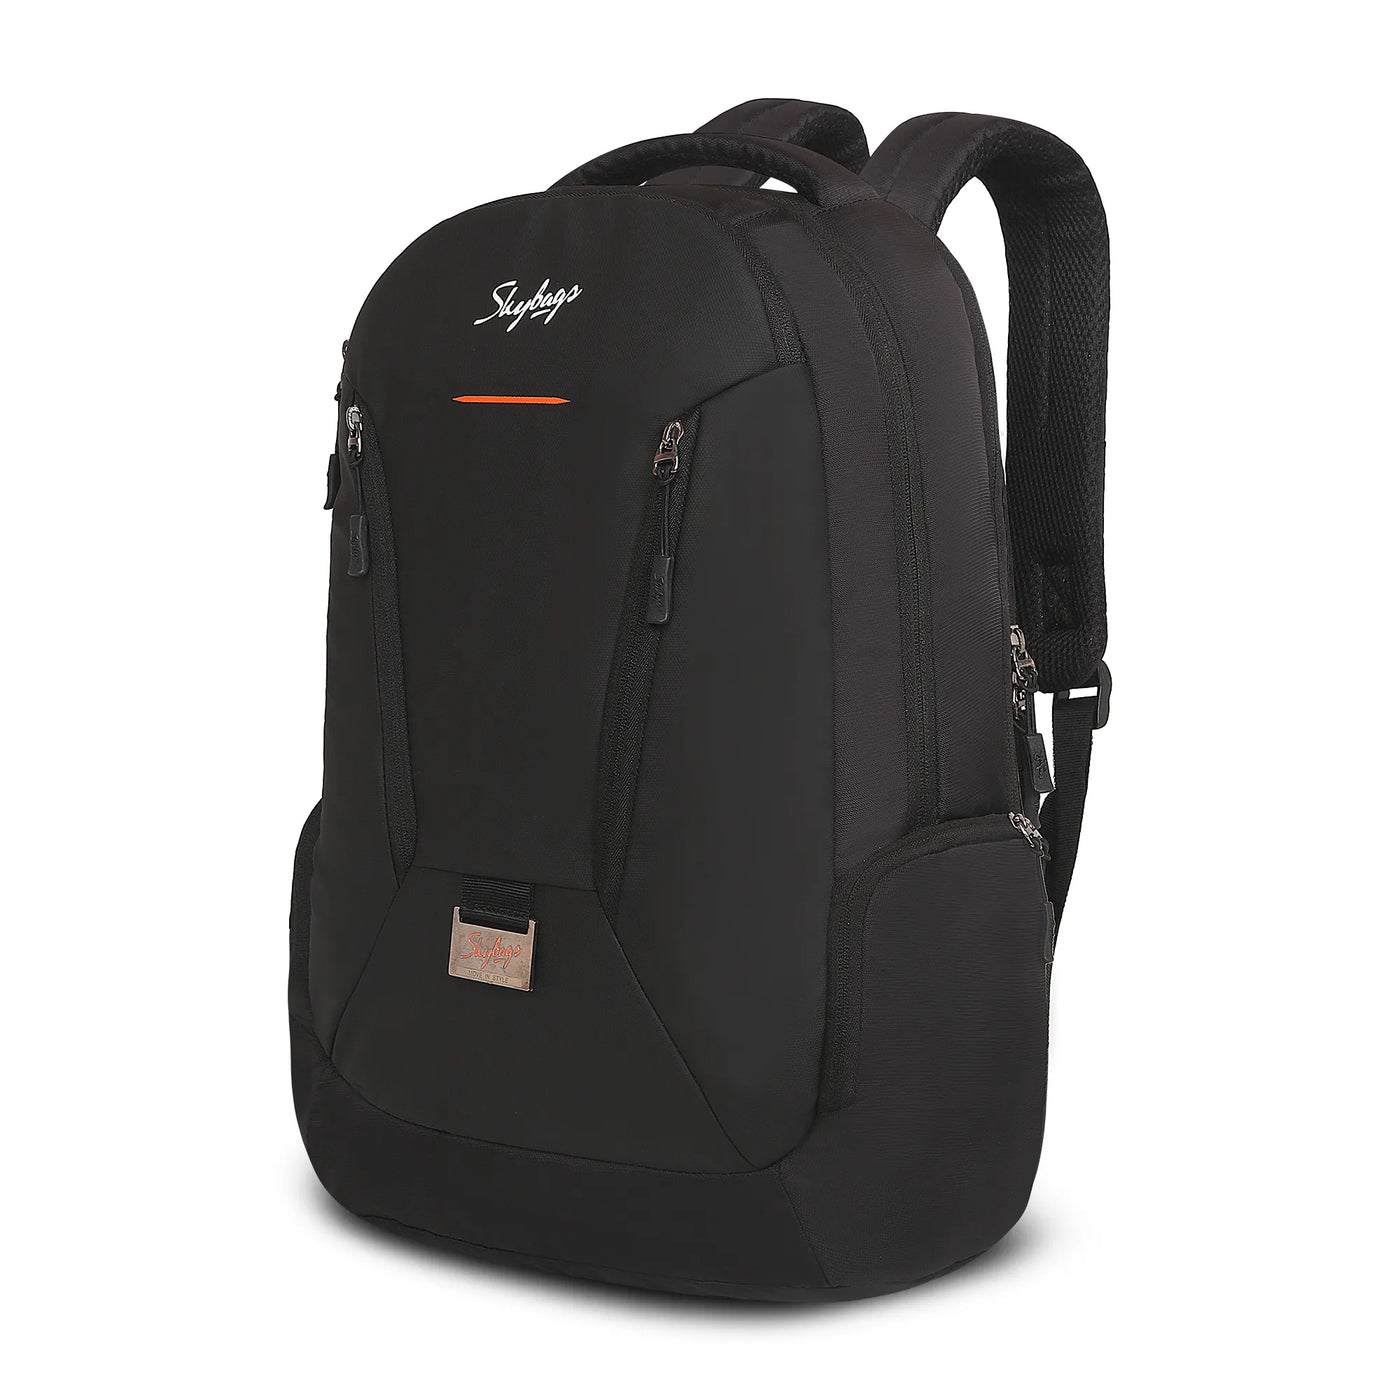 SKYBAGS CHESTER PRO "01 LAPTOP BACKPACK"